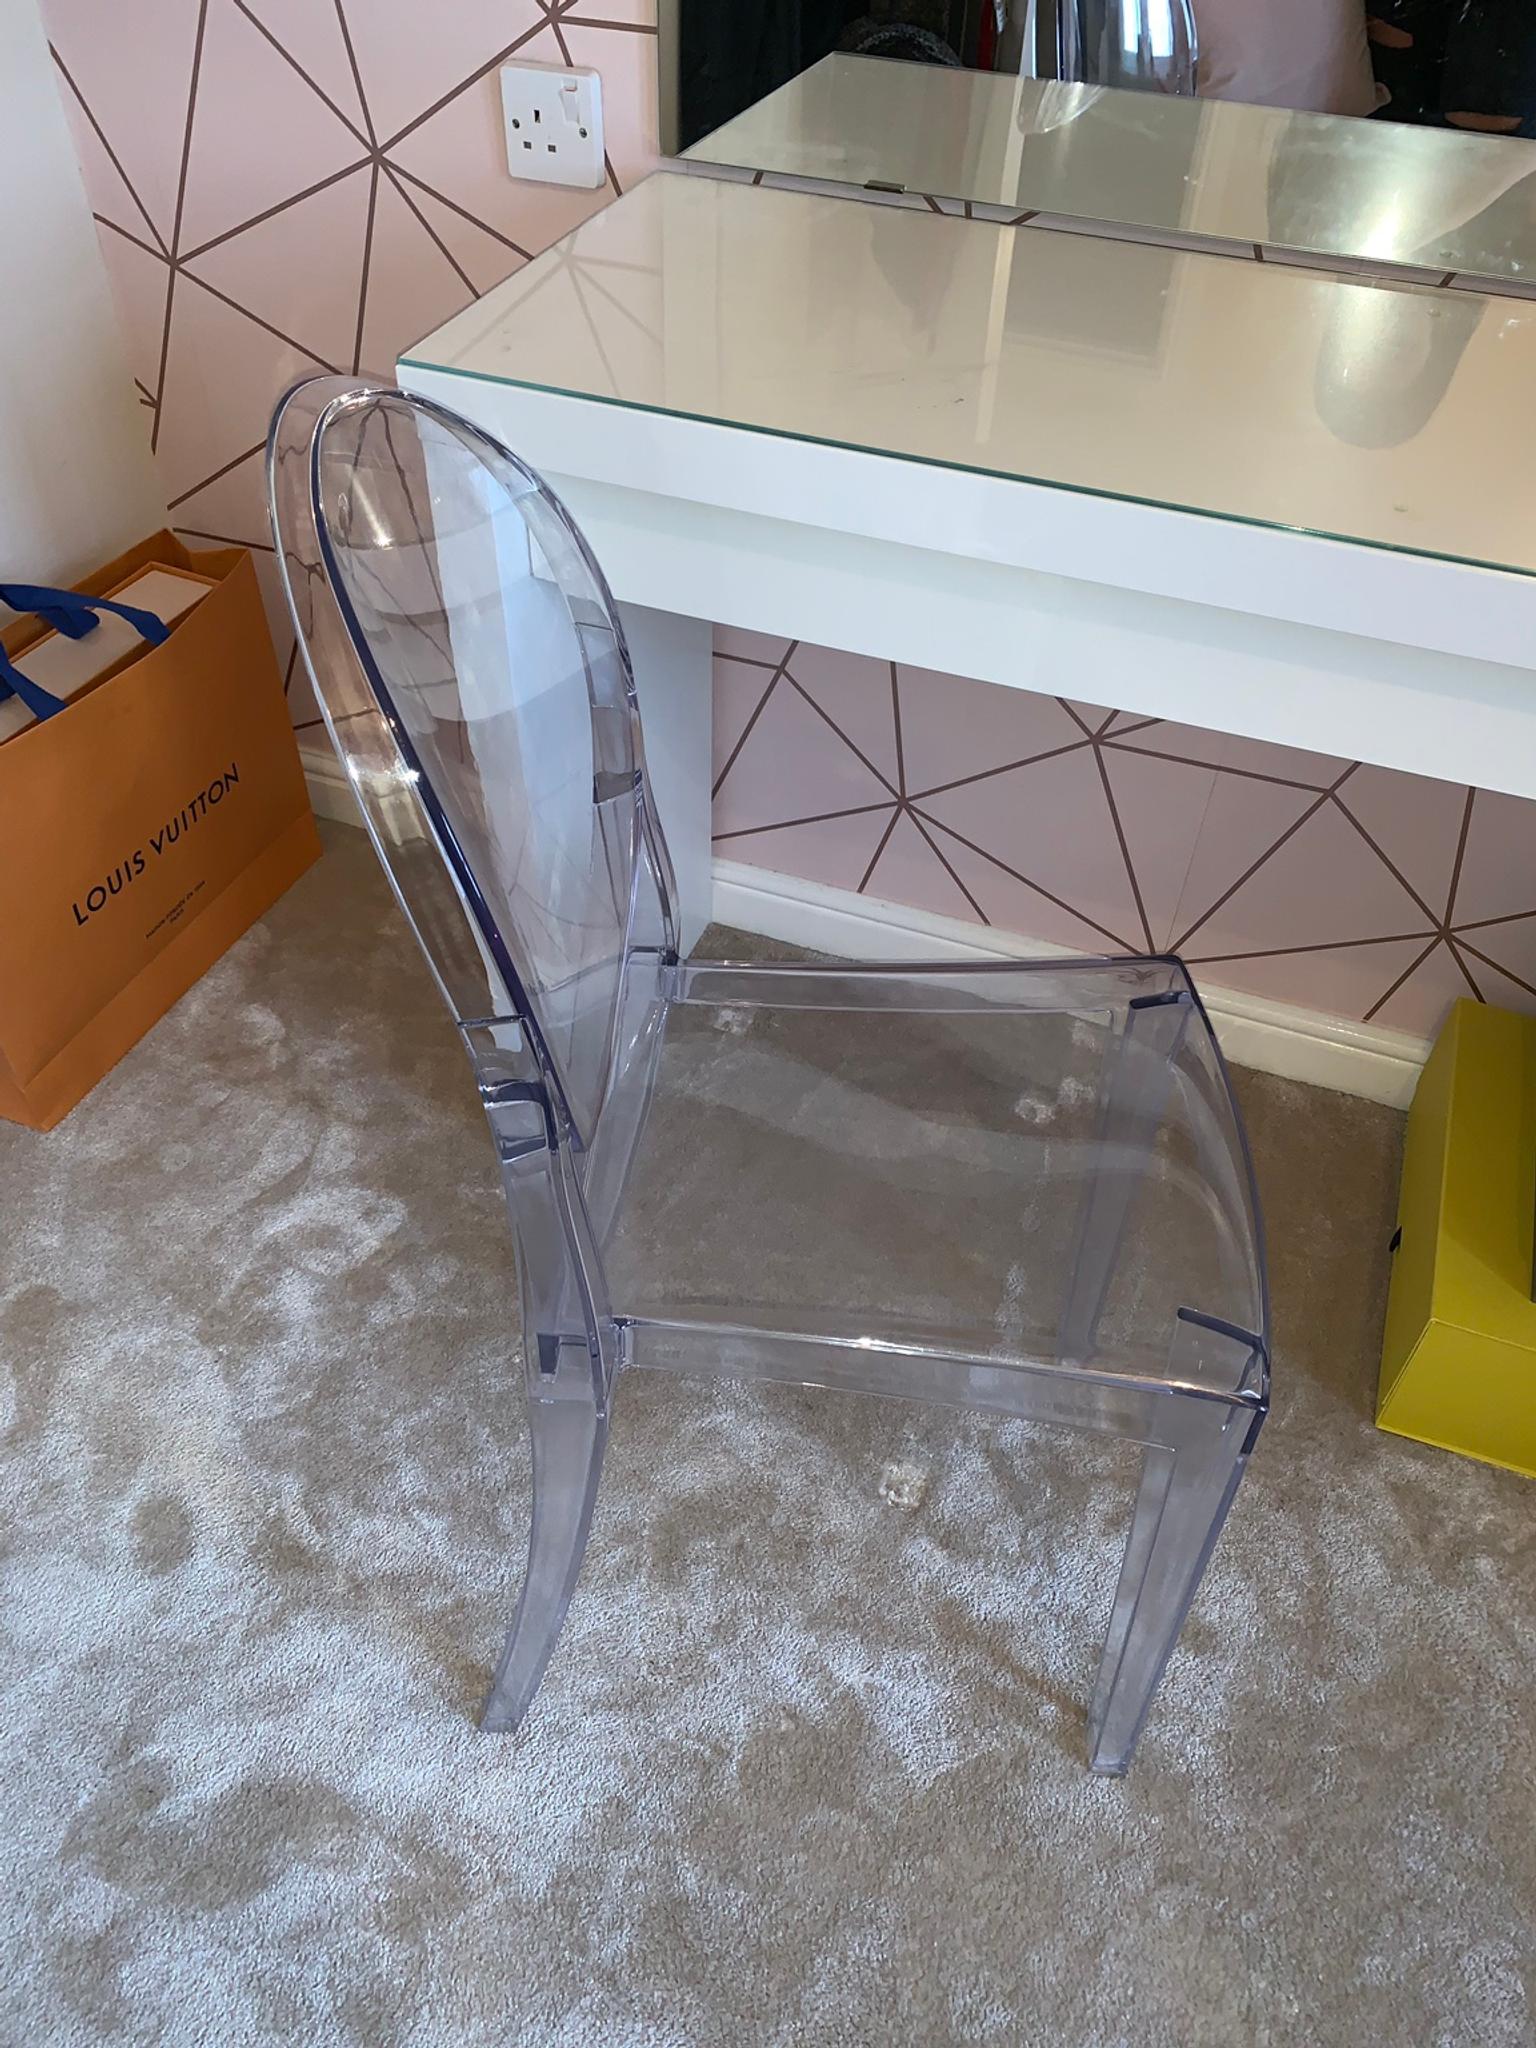 Malm Ikea Dressing Table With Perspex Chair In Wv14 Wolverhampton